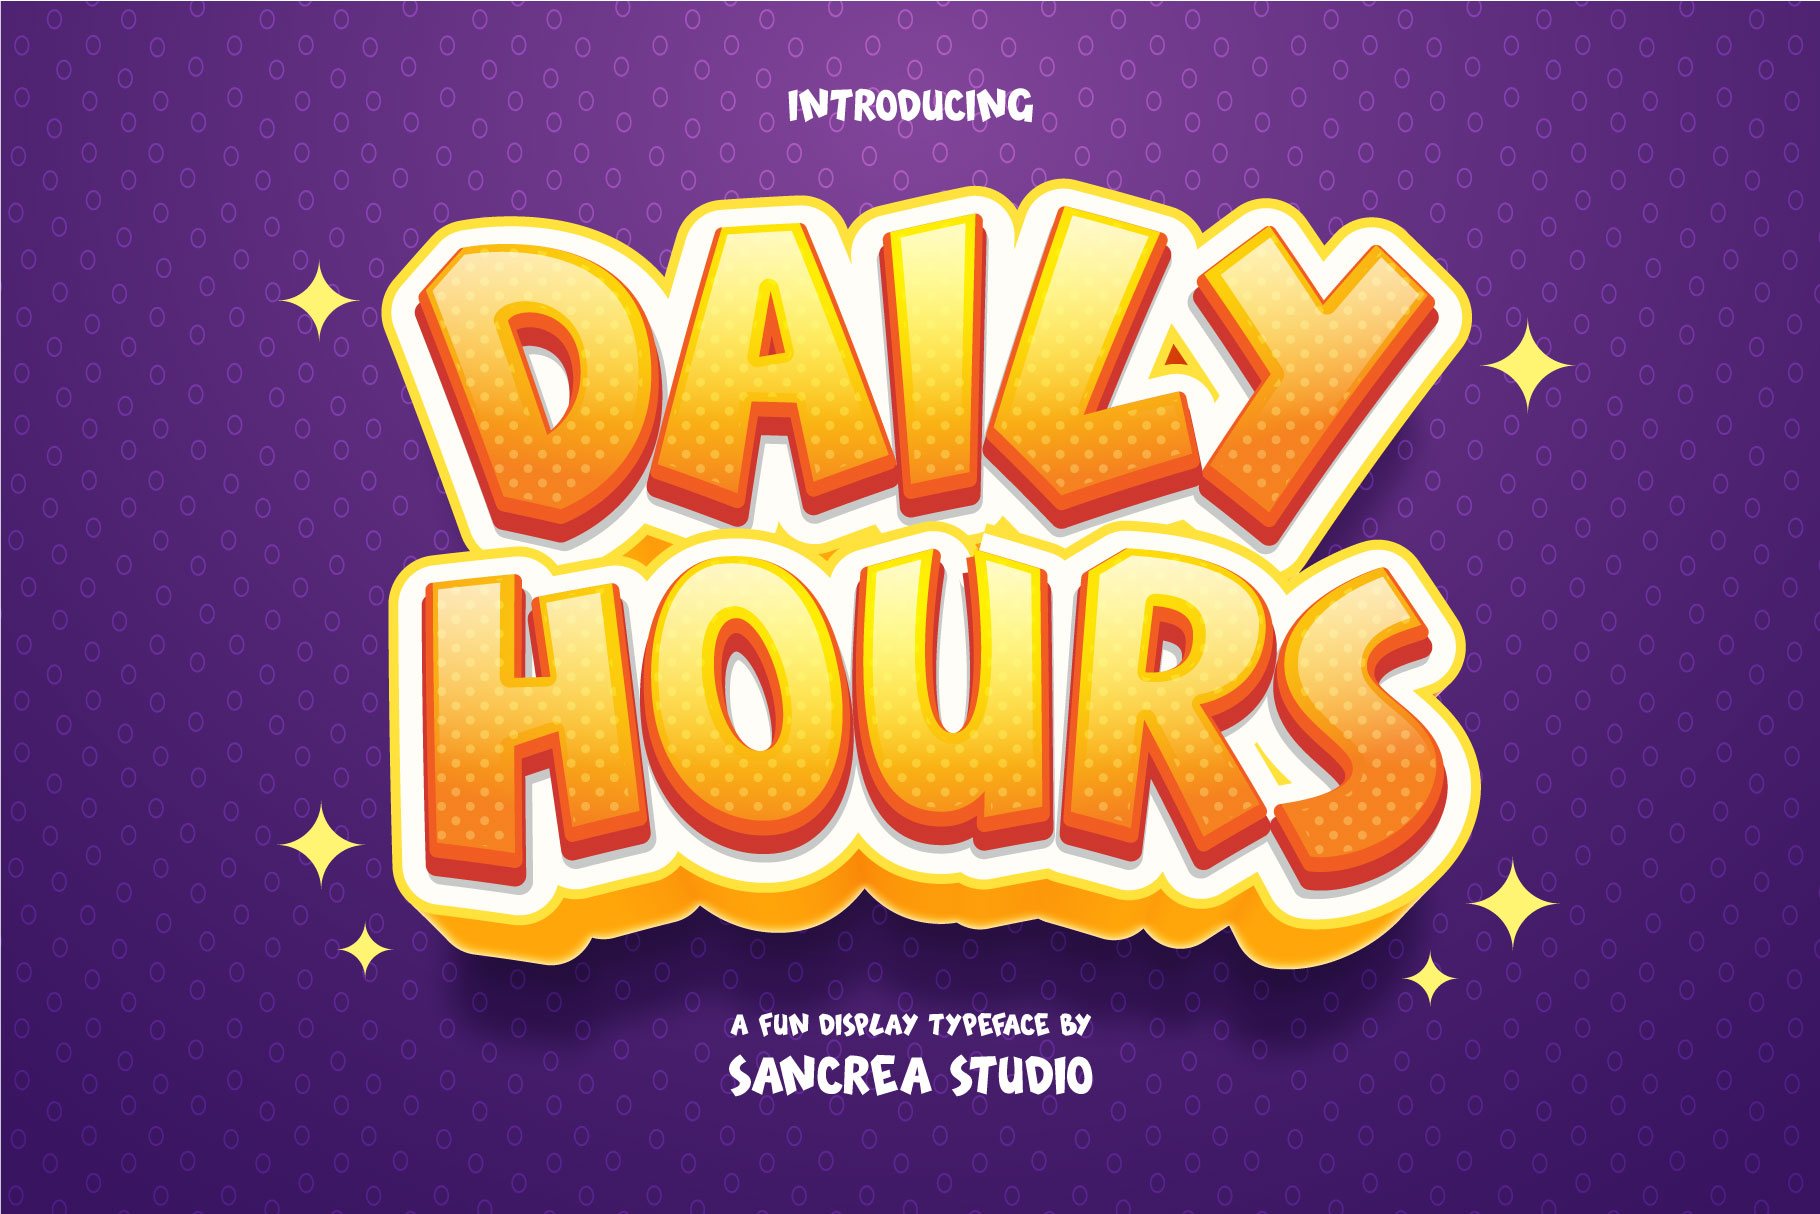 Daily Hours